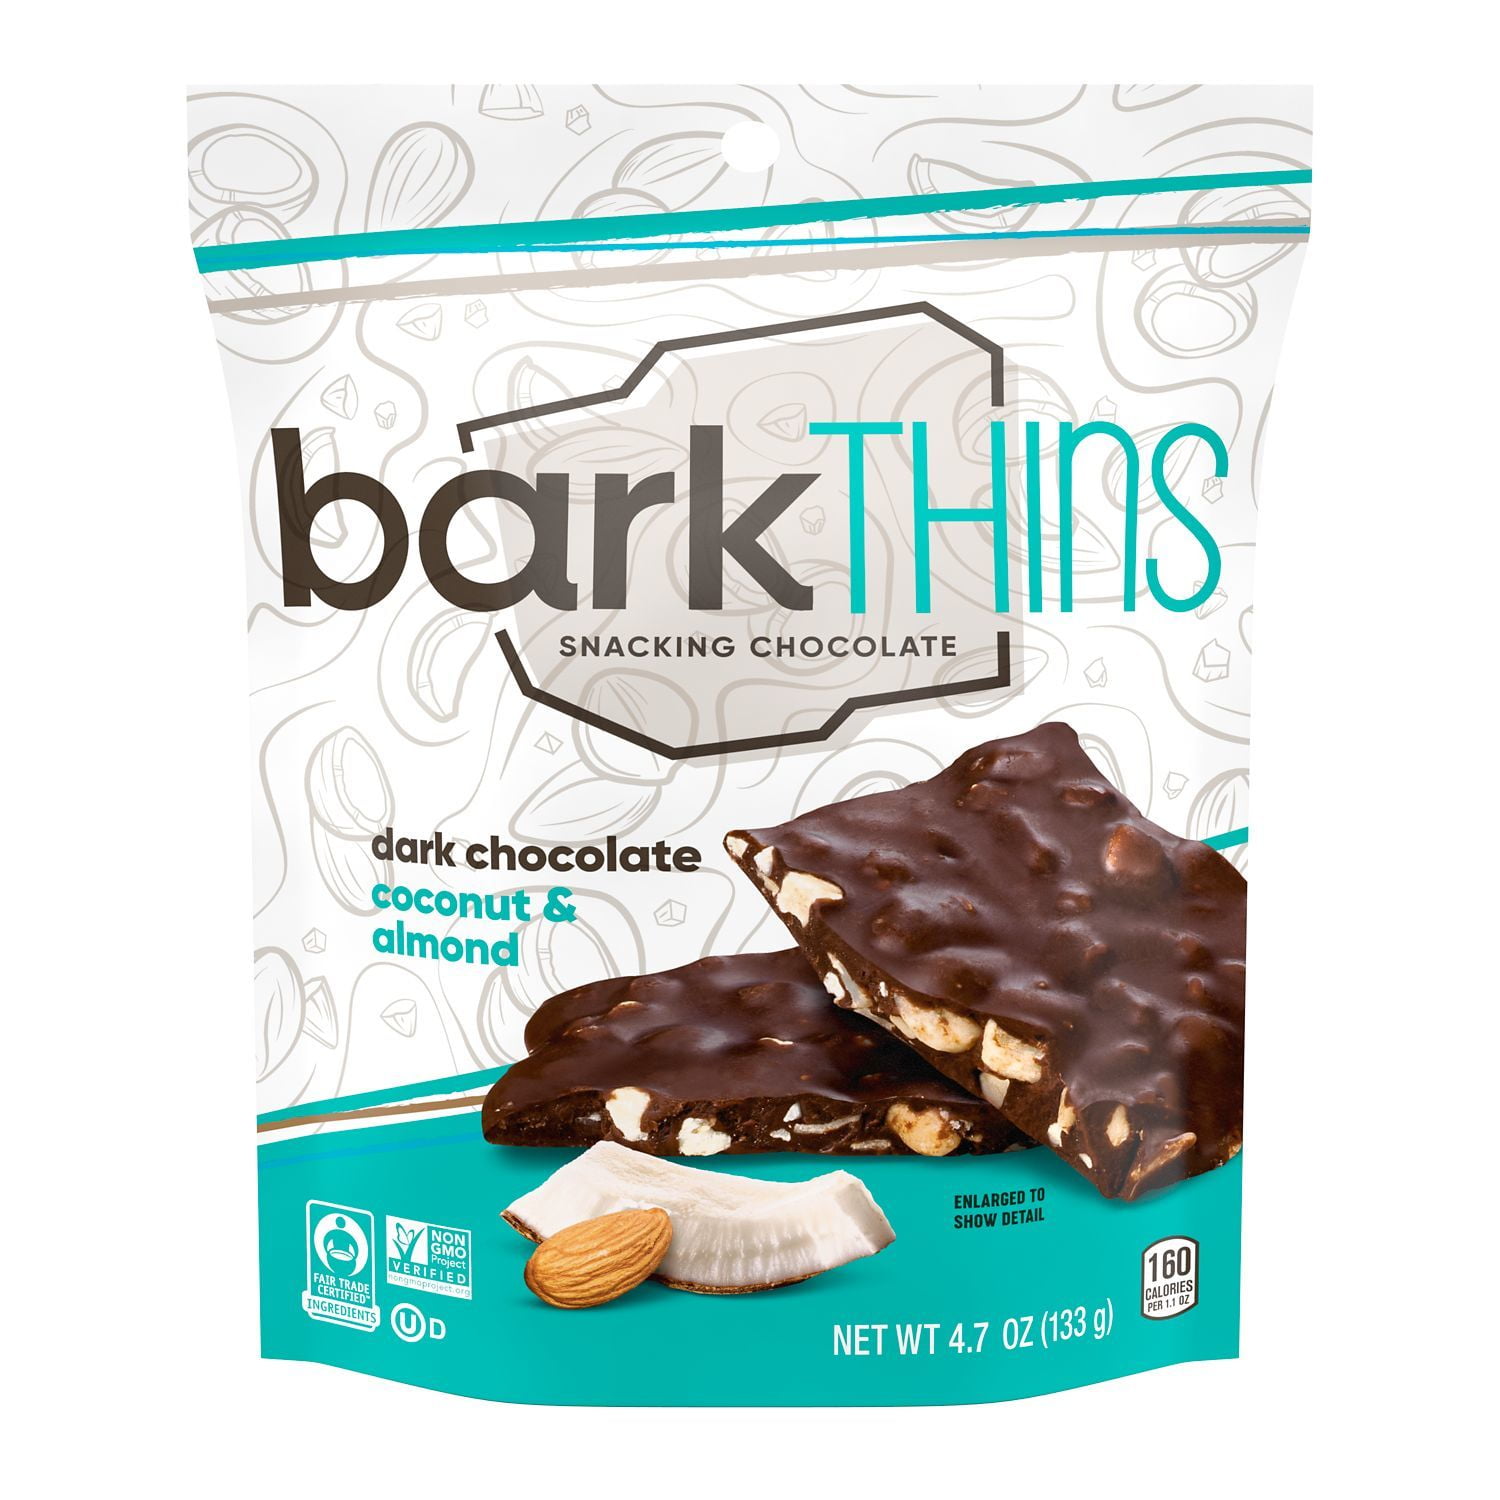 barkTHINS, Dark Chocolate Coconut and Almond Snacking Chocolate, Holiday, 4.7 oz, Bags (6 Count)